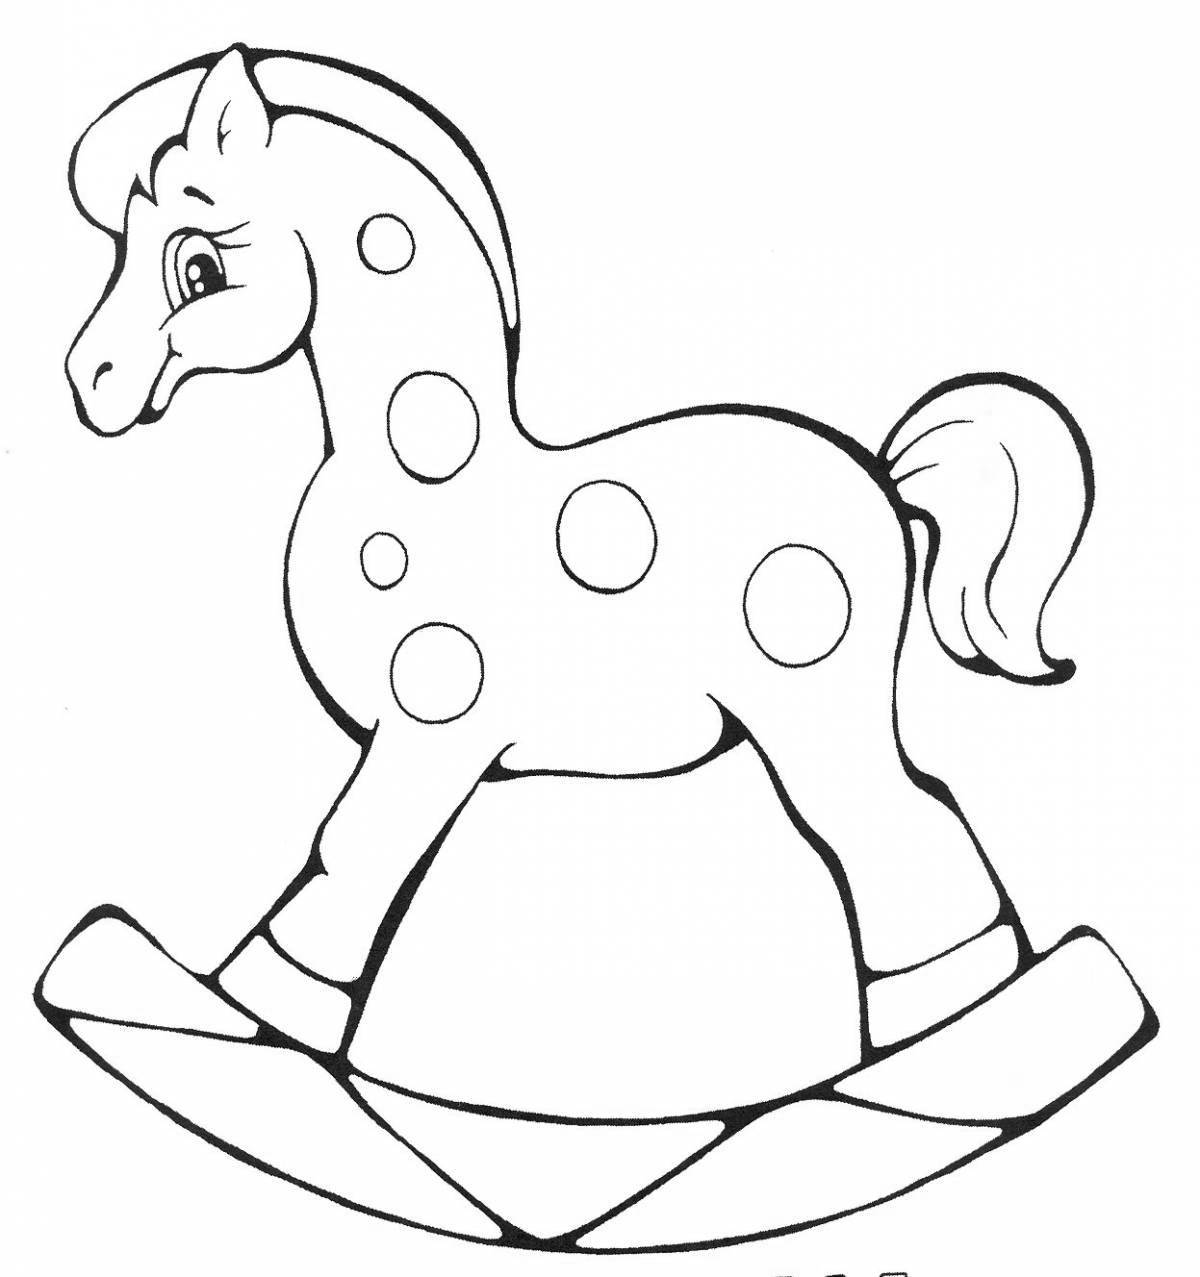 Fantastic horse coloring book for 3-4 year olds